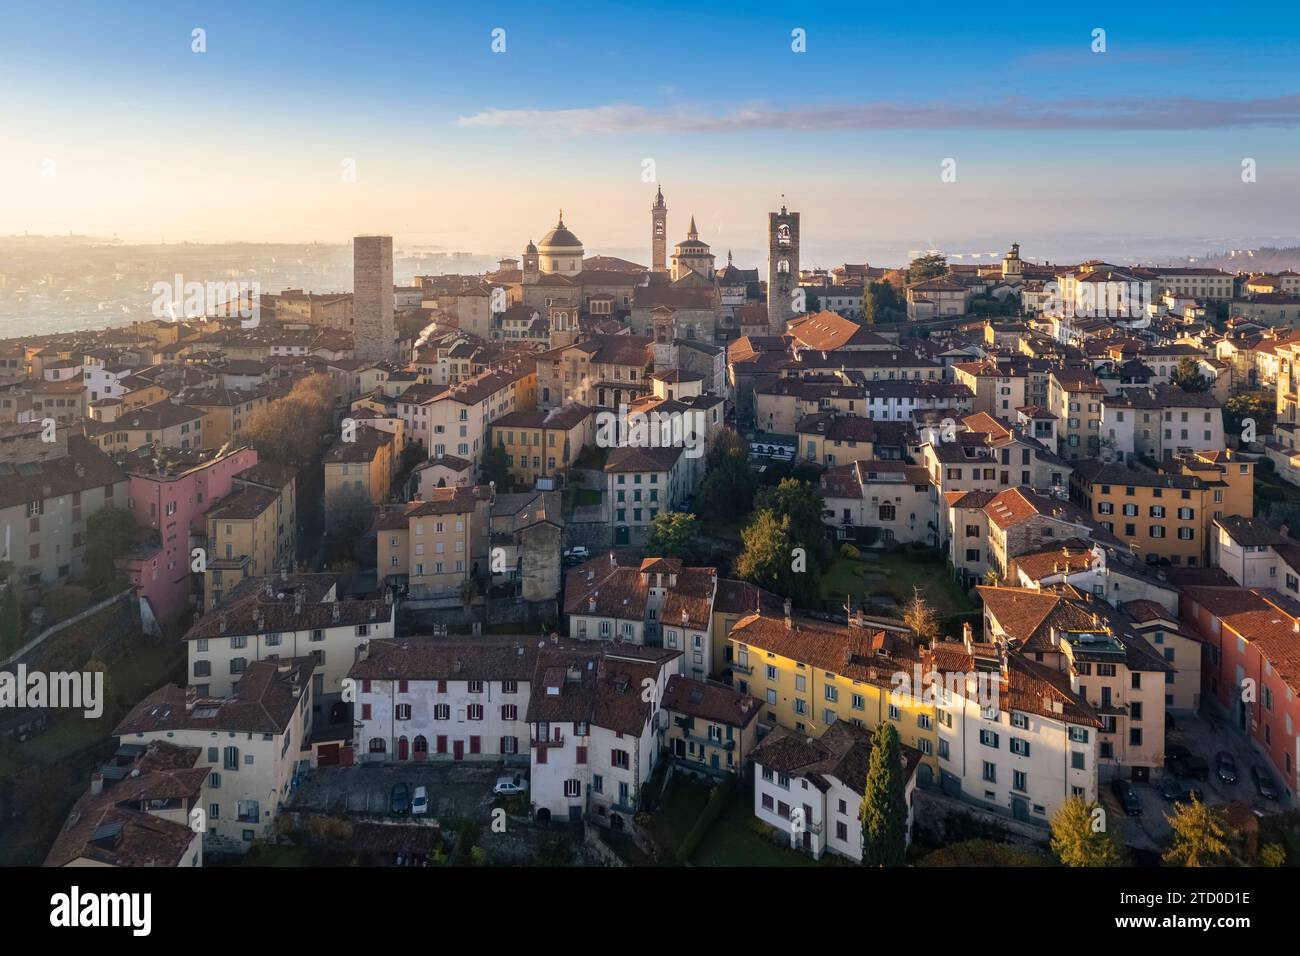 View of the rooftops, churches and towers of the Upper Town (Città Alta) of Bergamo city at sunrise. Bergamo, Lombardy, Italy. Stock Photo